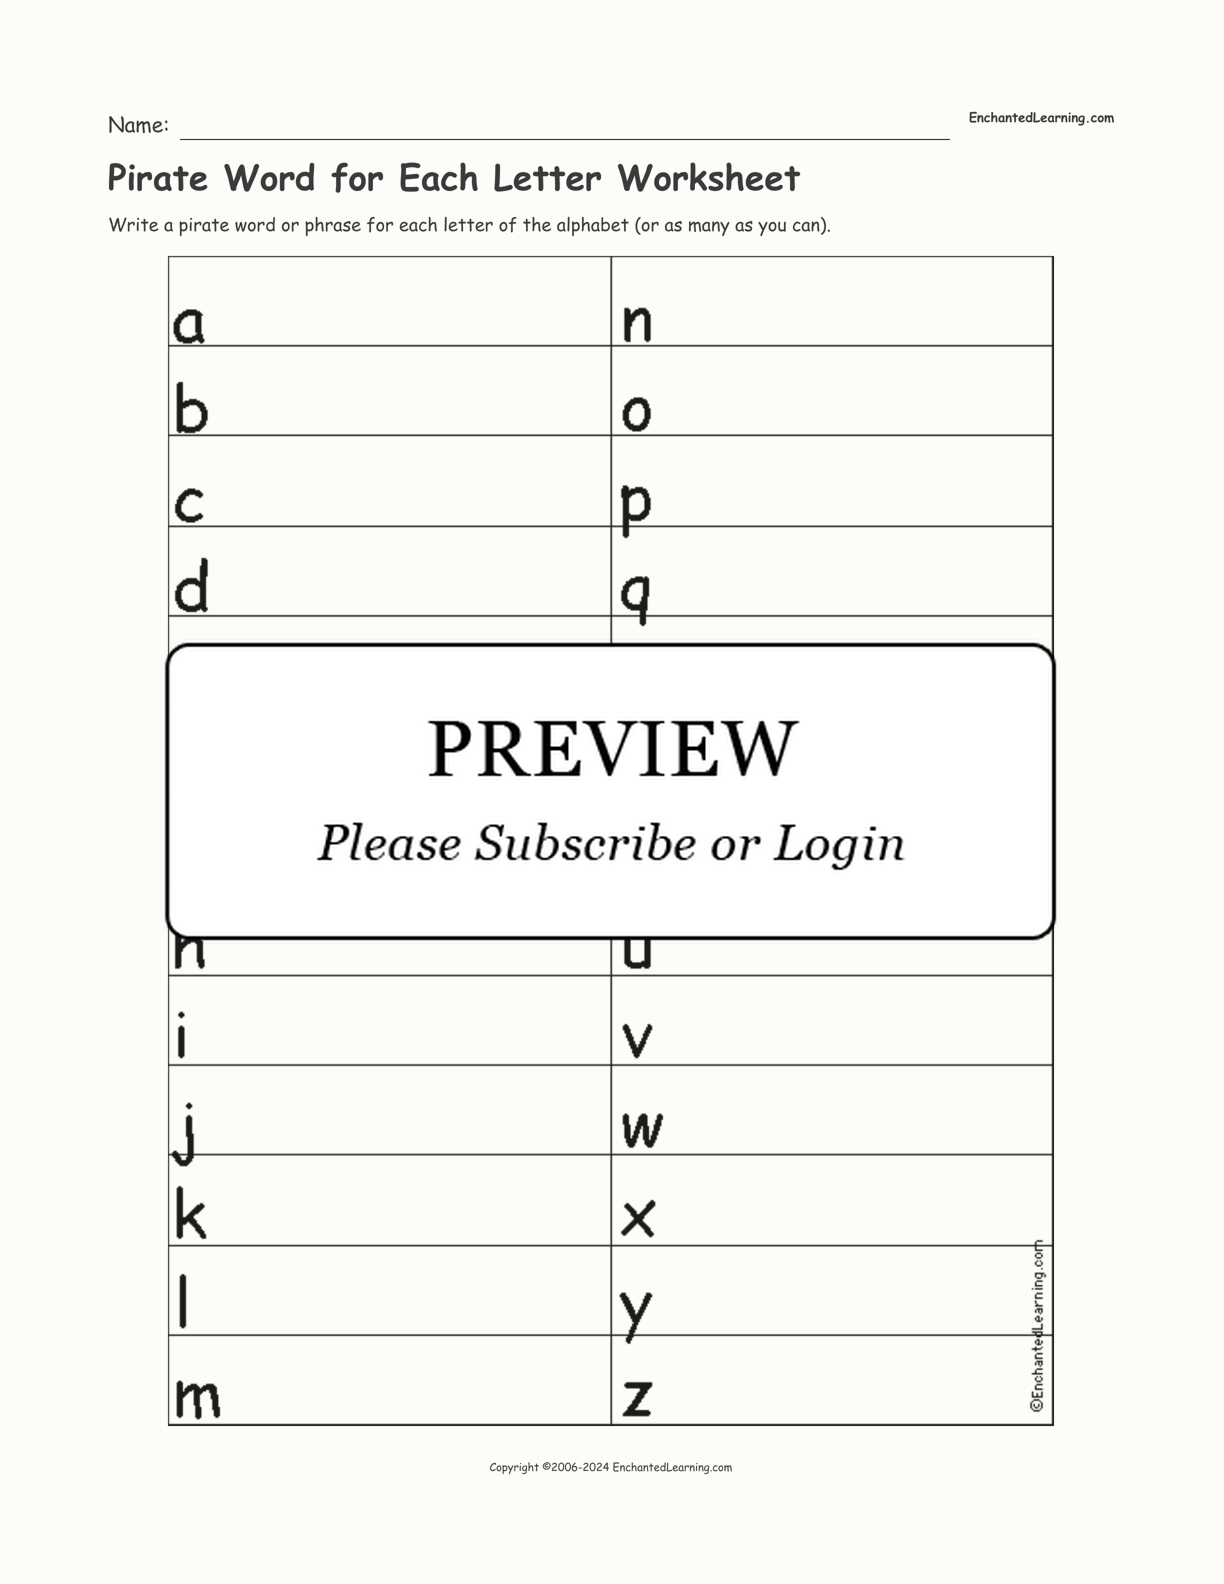 Pirate Word for Each Letter Worksheet interactive worksheet page 1